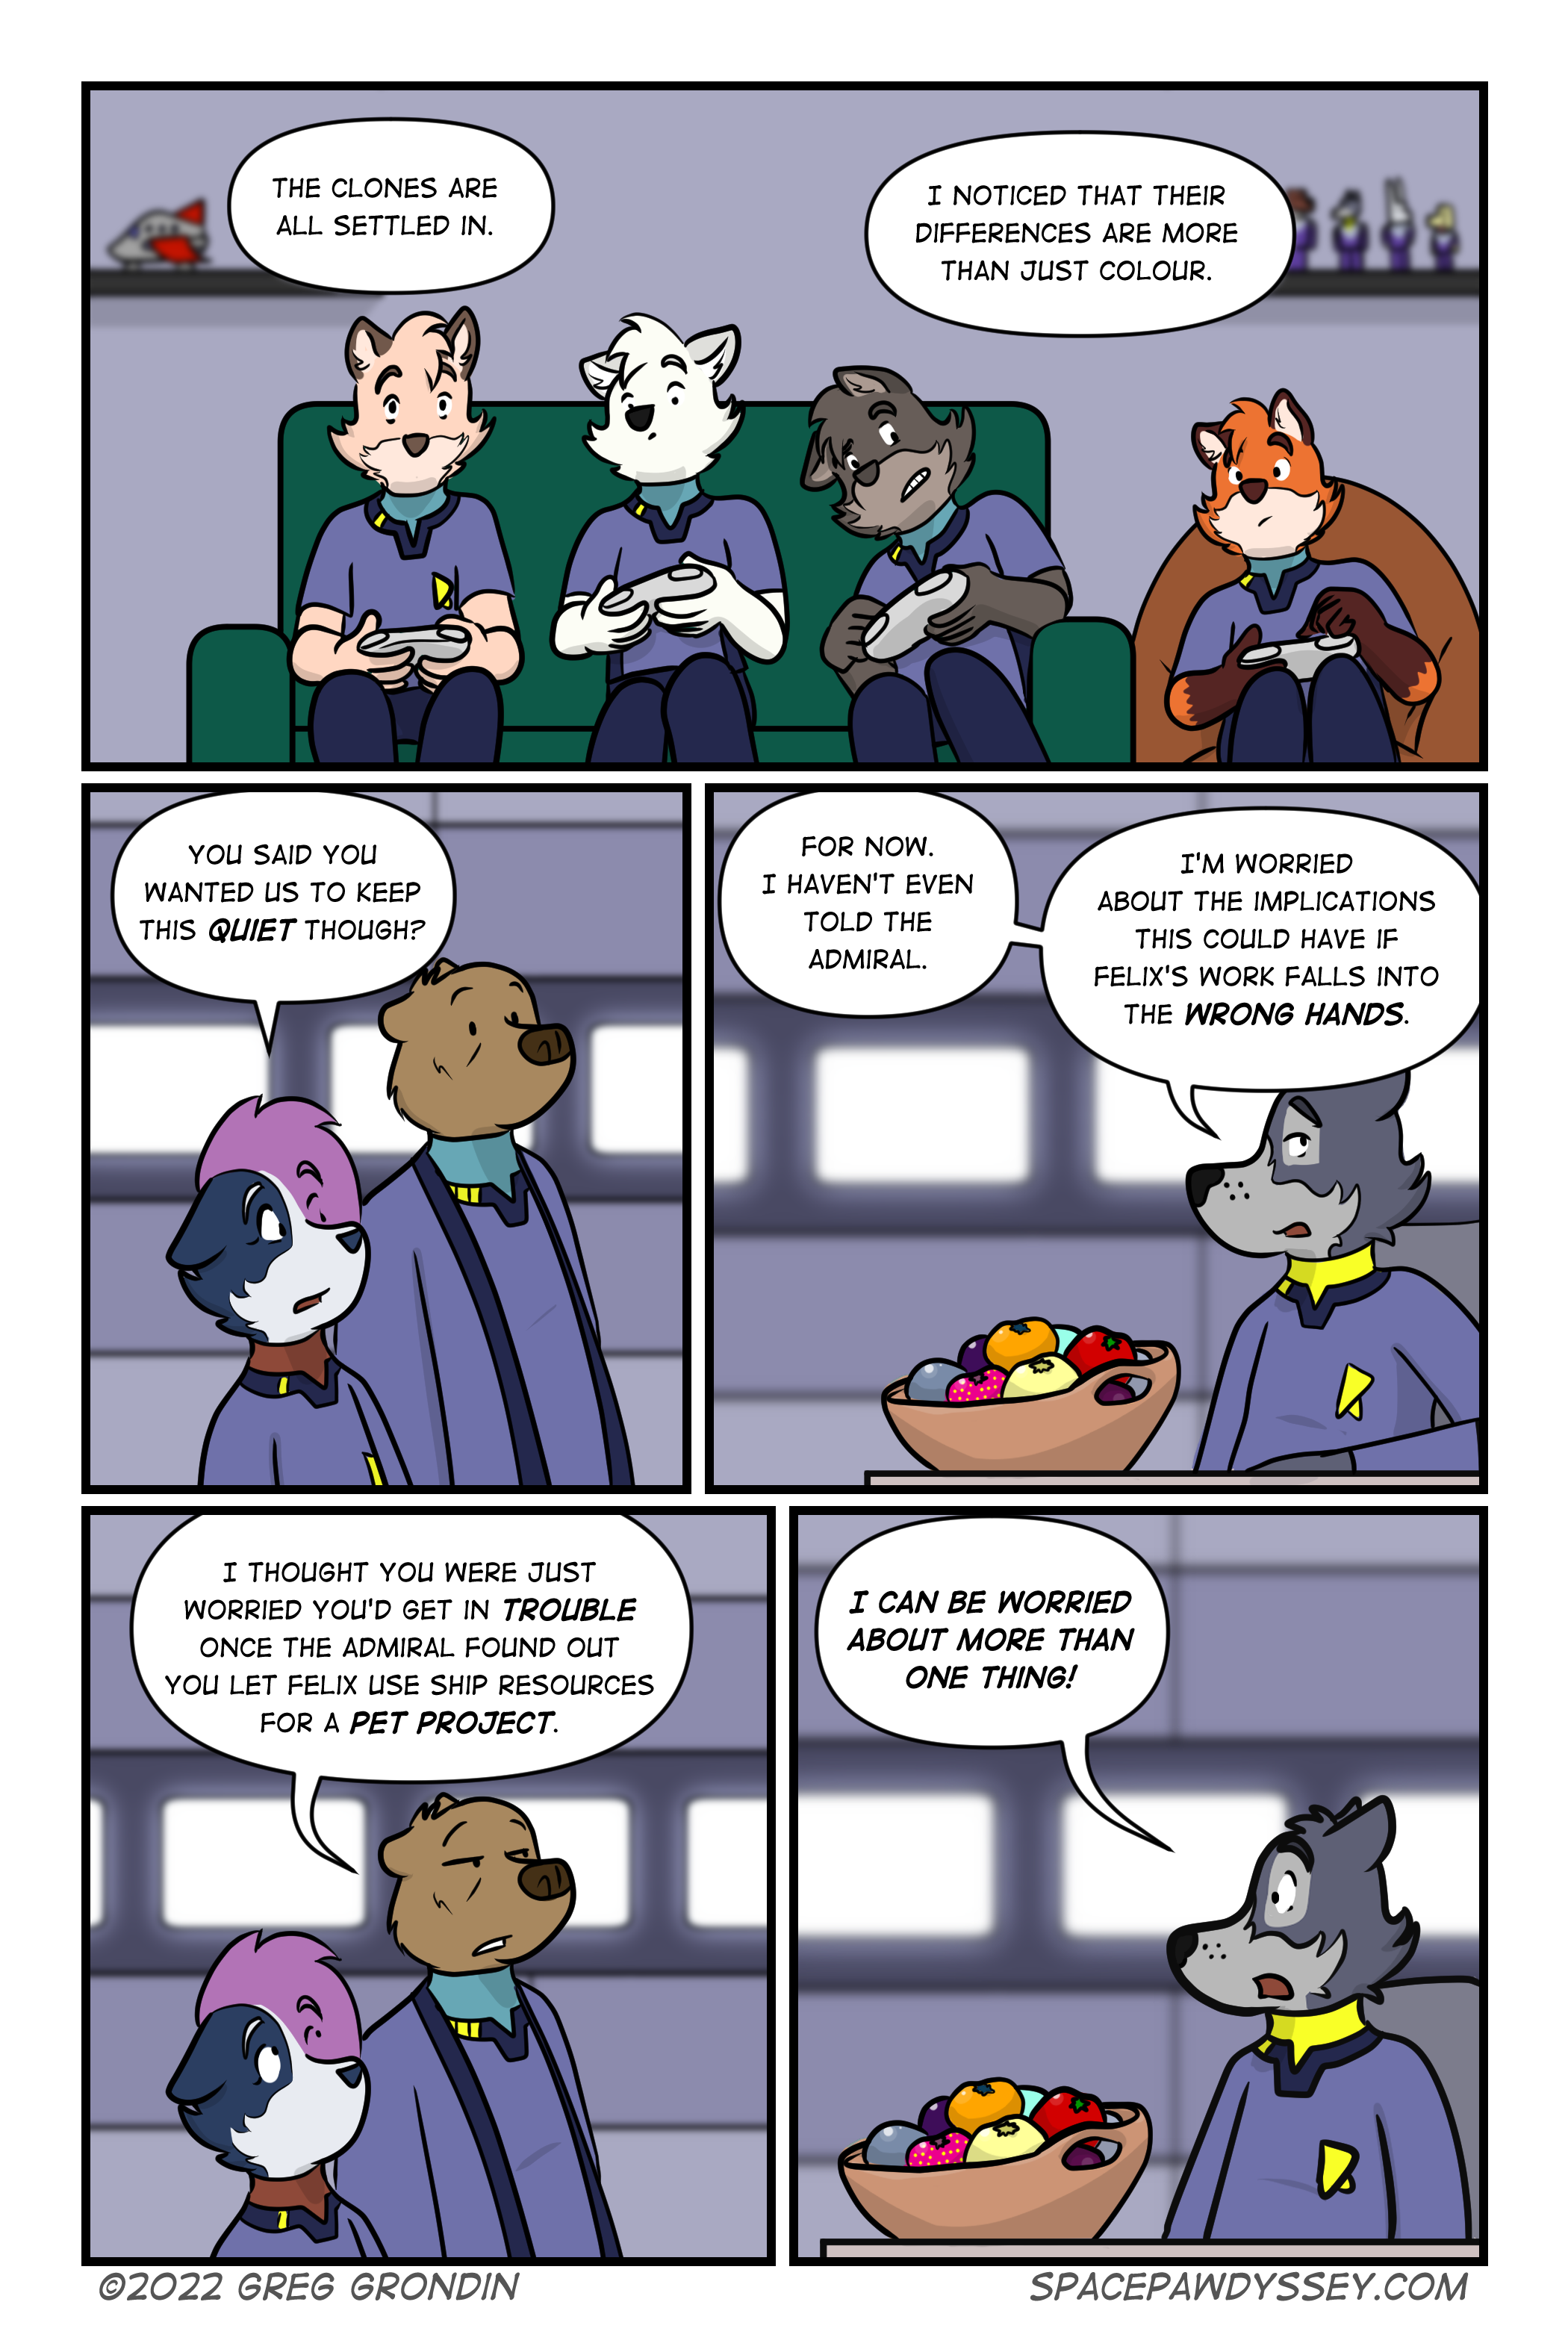 Space Pawdyssey #606